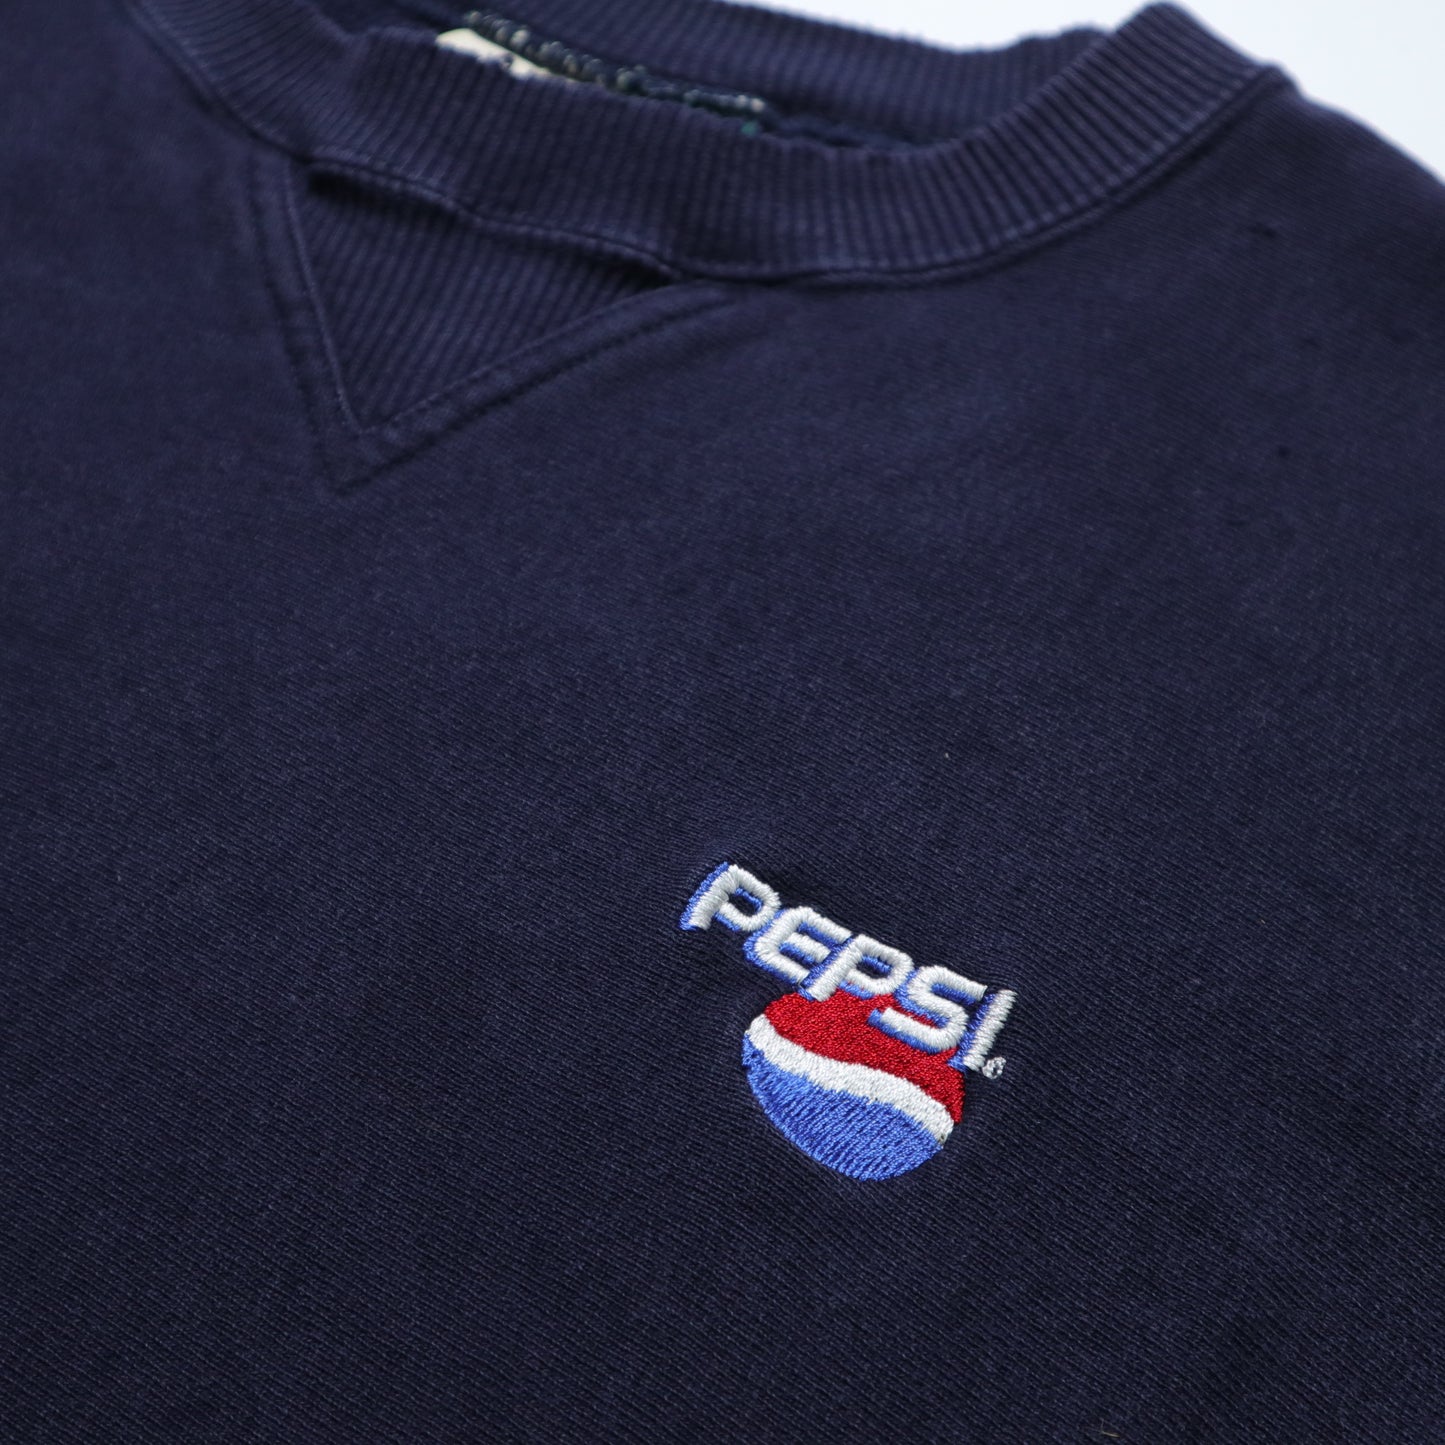 90s Canadian-made Pepsi-Cola plain sweatshirt, damaged by the wind and sun, old-fashioned vintage sweatshirt